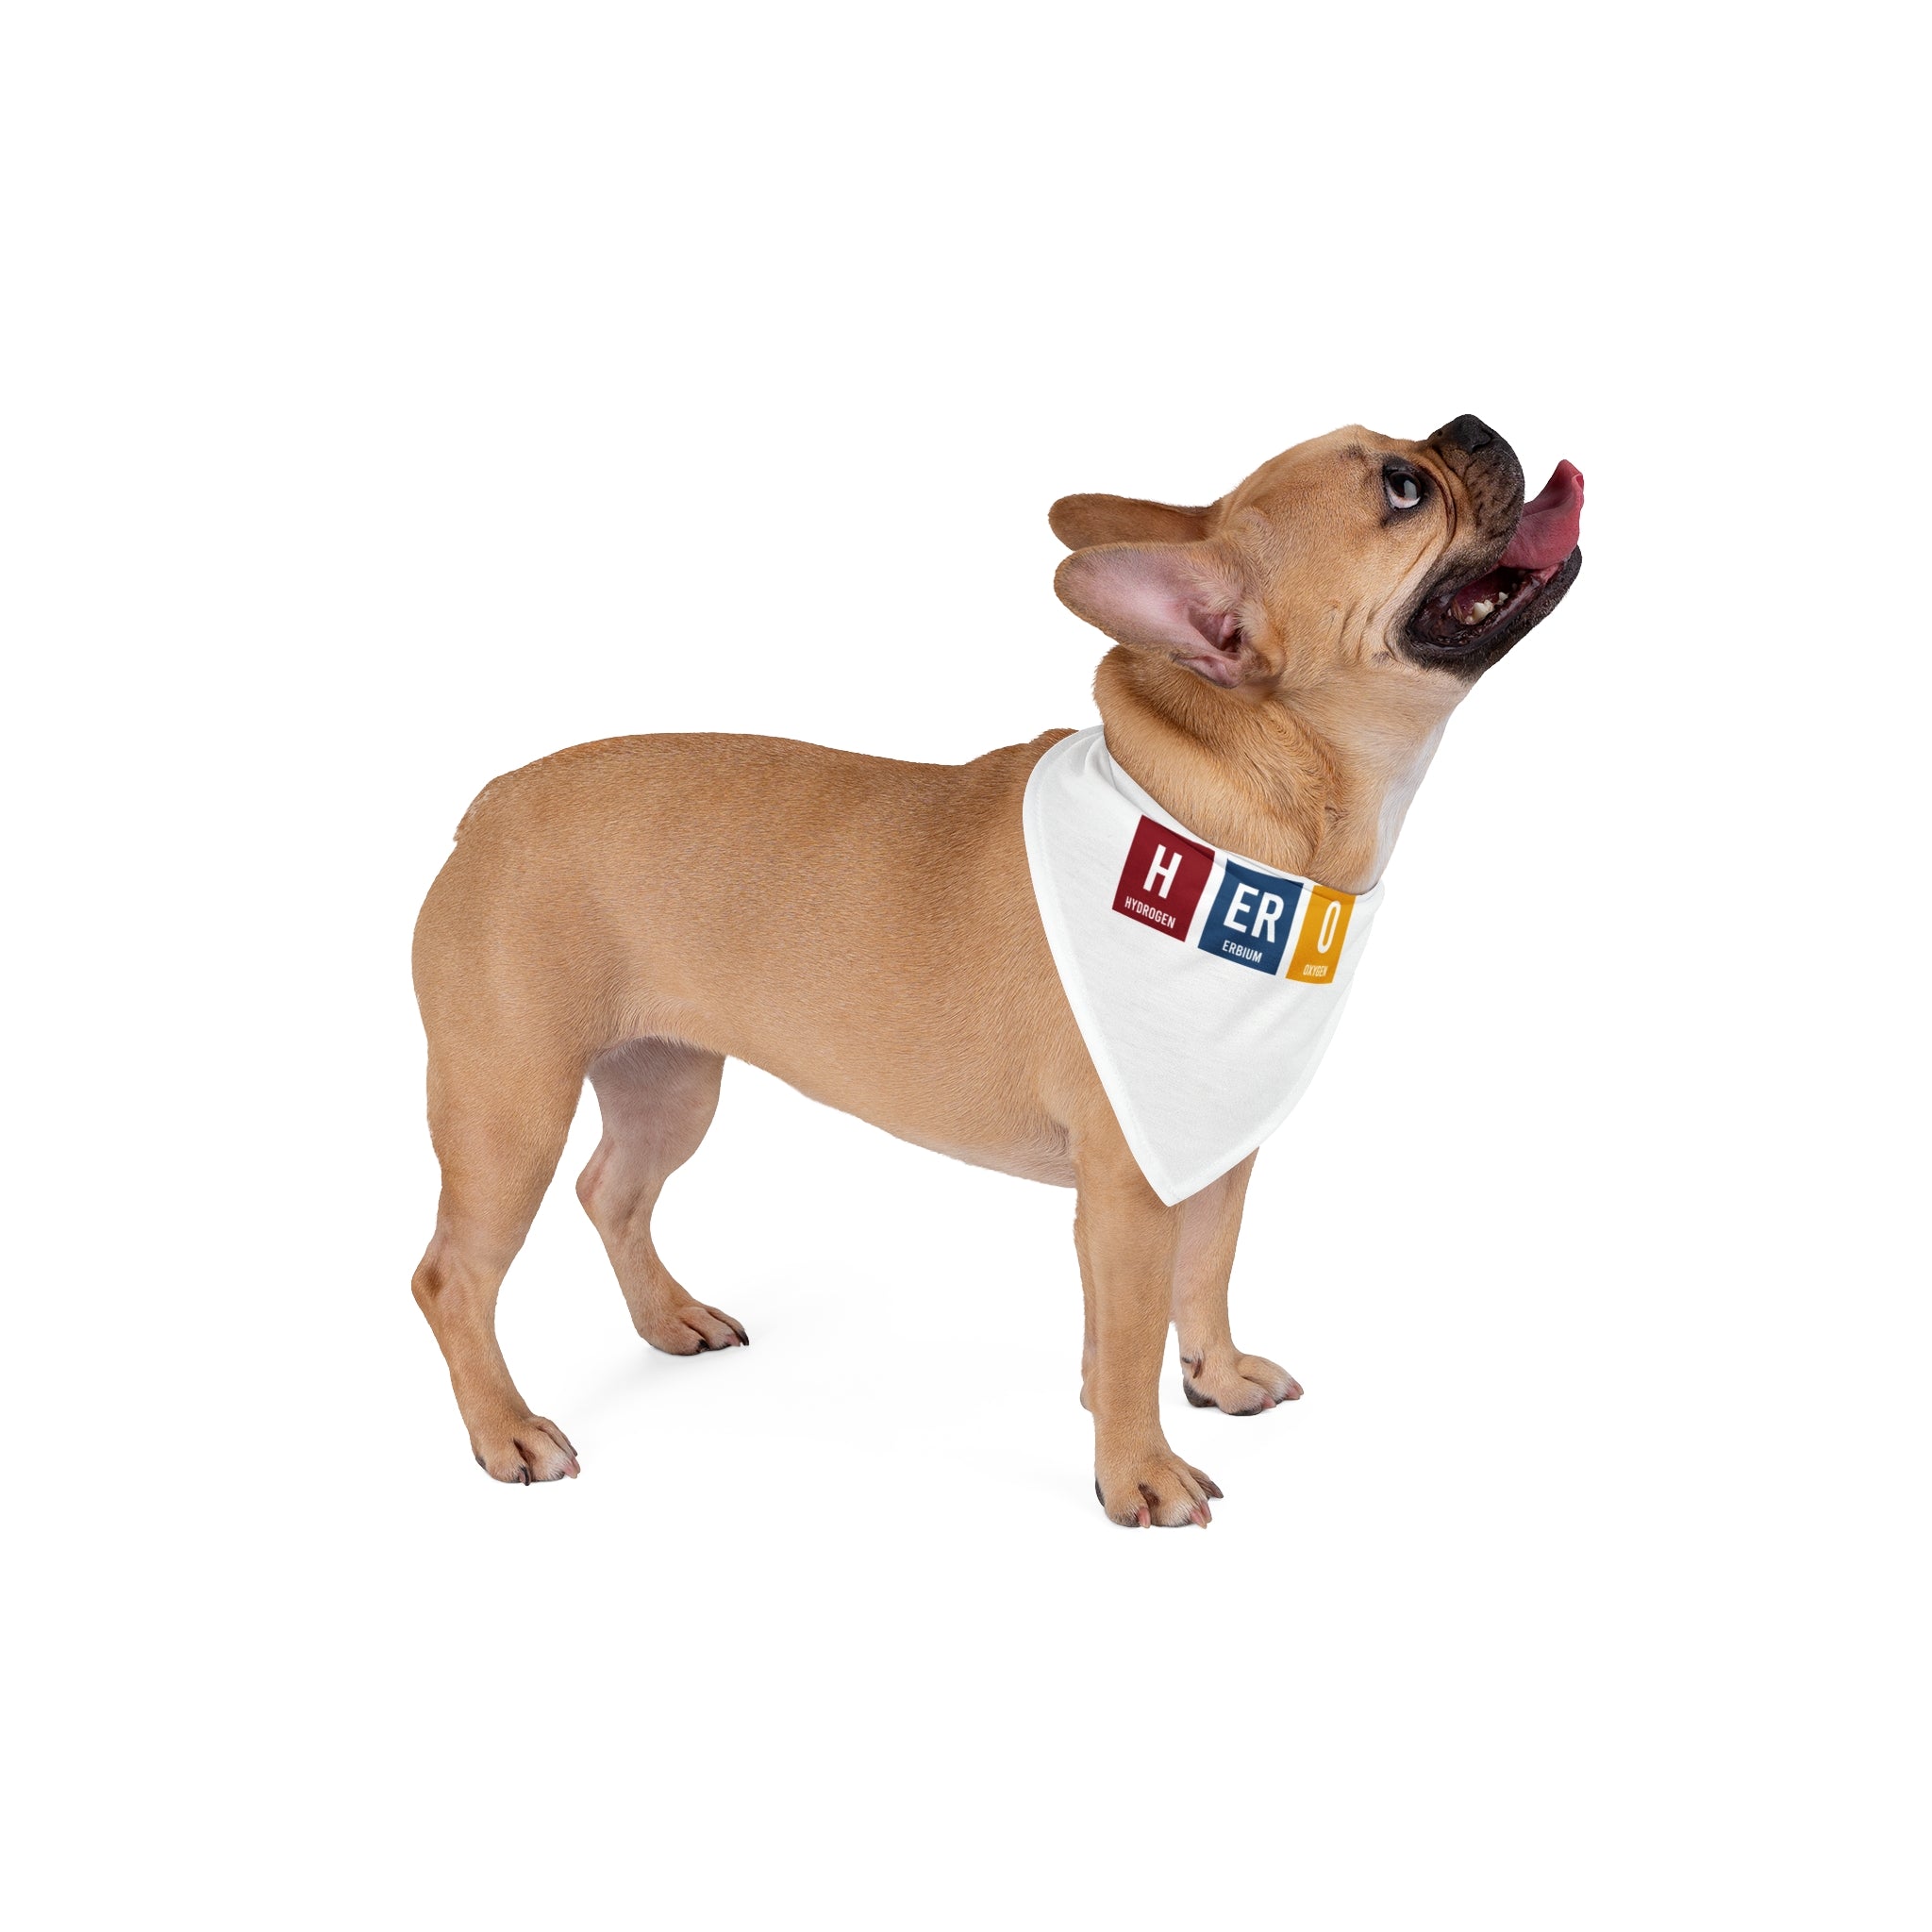 A small tan dog stands facing left, wearing a soft-spun polyester HERO - Pet Bandana with colorful letters spelling "HERO" on it. The dog's mouth is open and its tongue is out, showing off its charming pet-friendly demeanor.